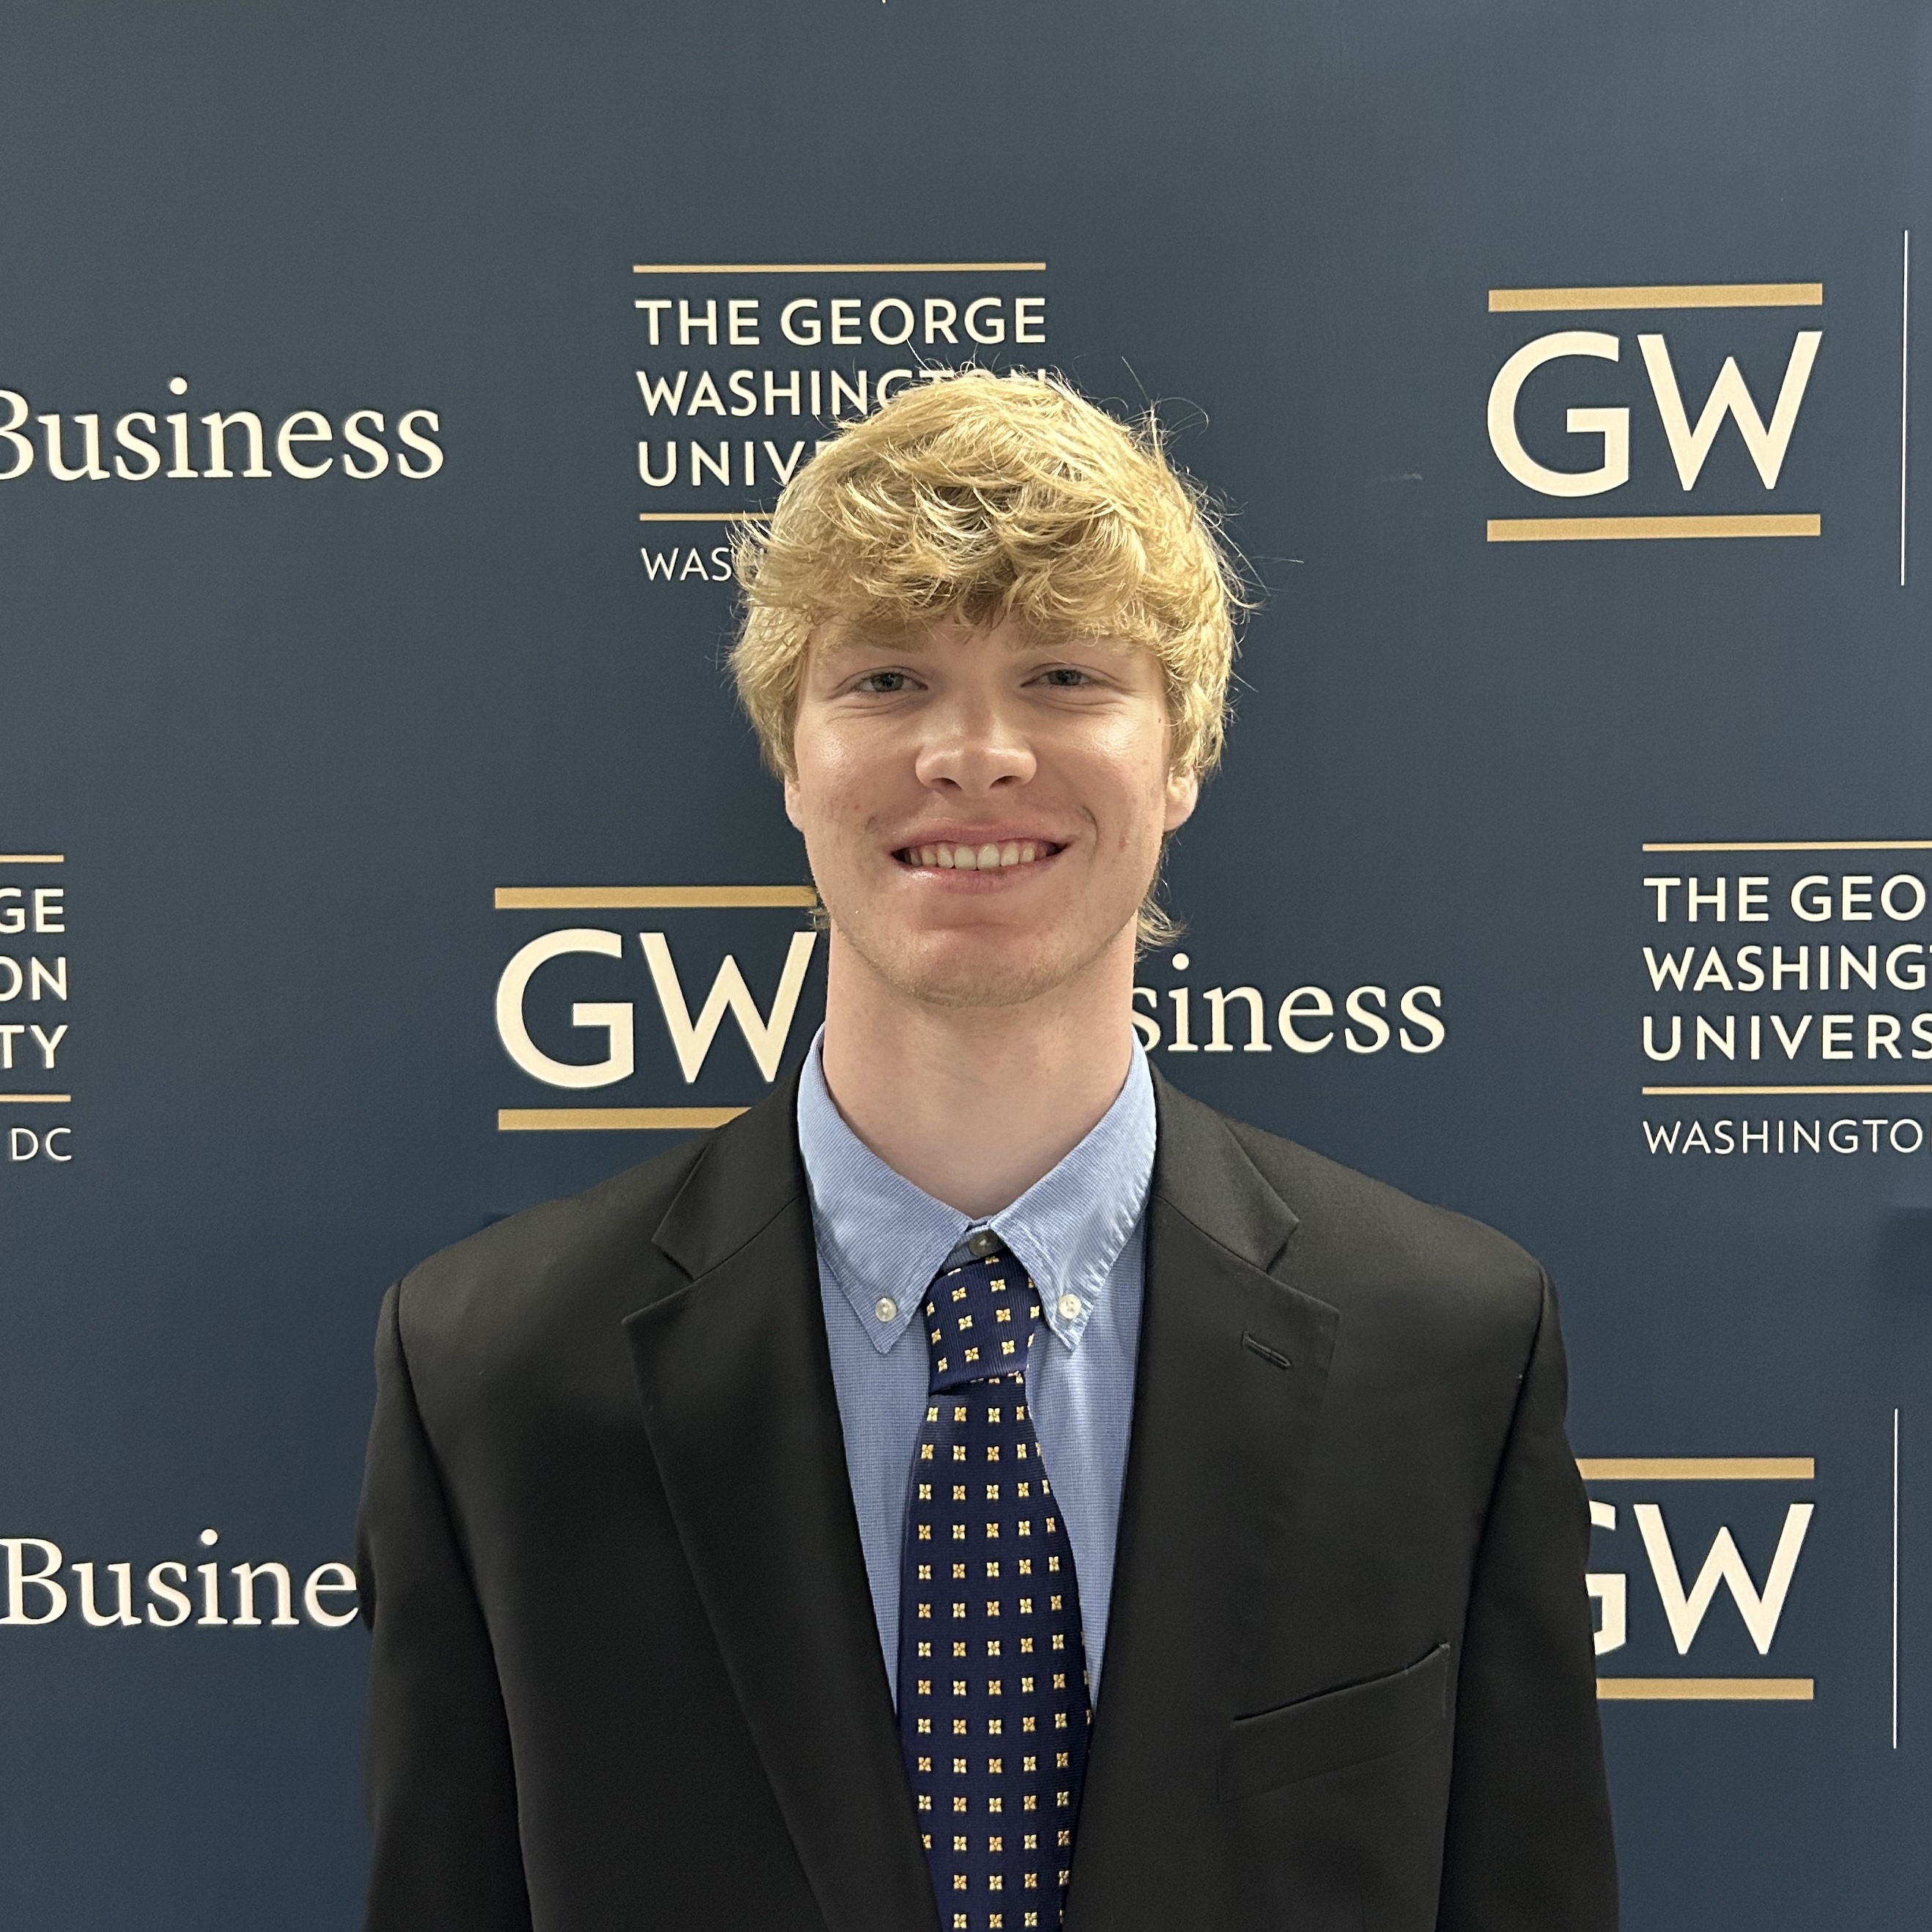 Colin is a sophmore studying Business-Finance. Colin works with the finance team as an analyst.